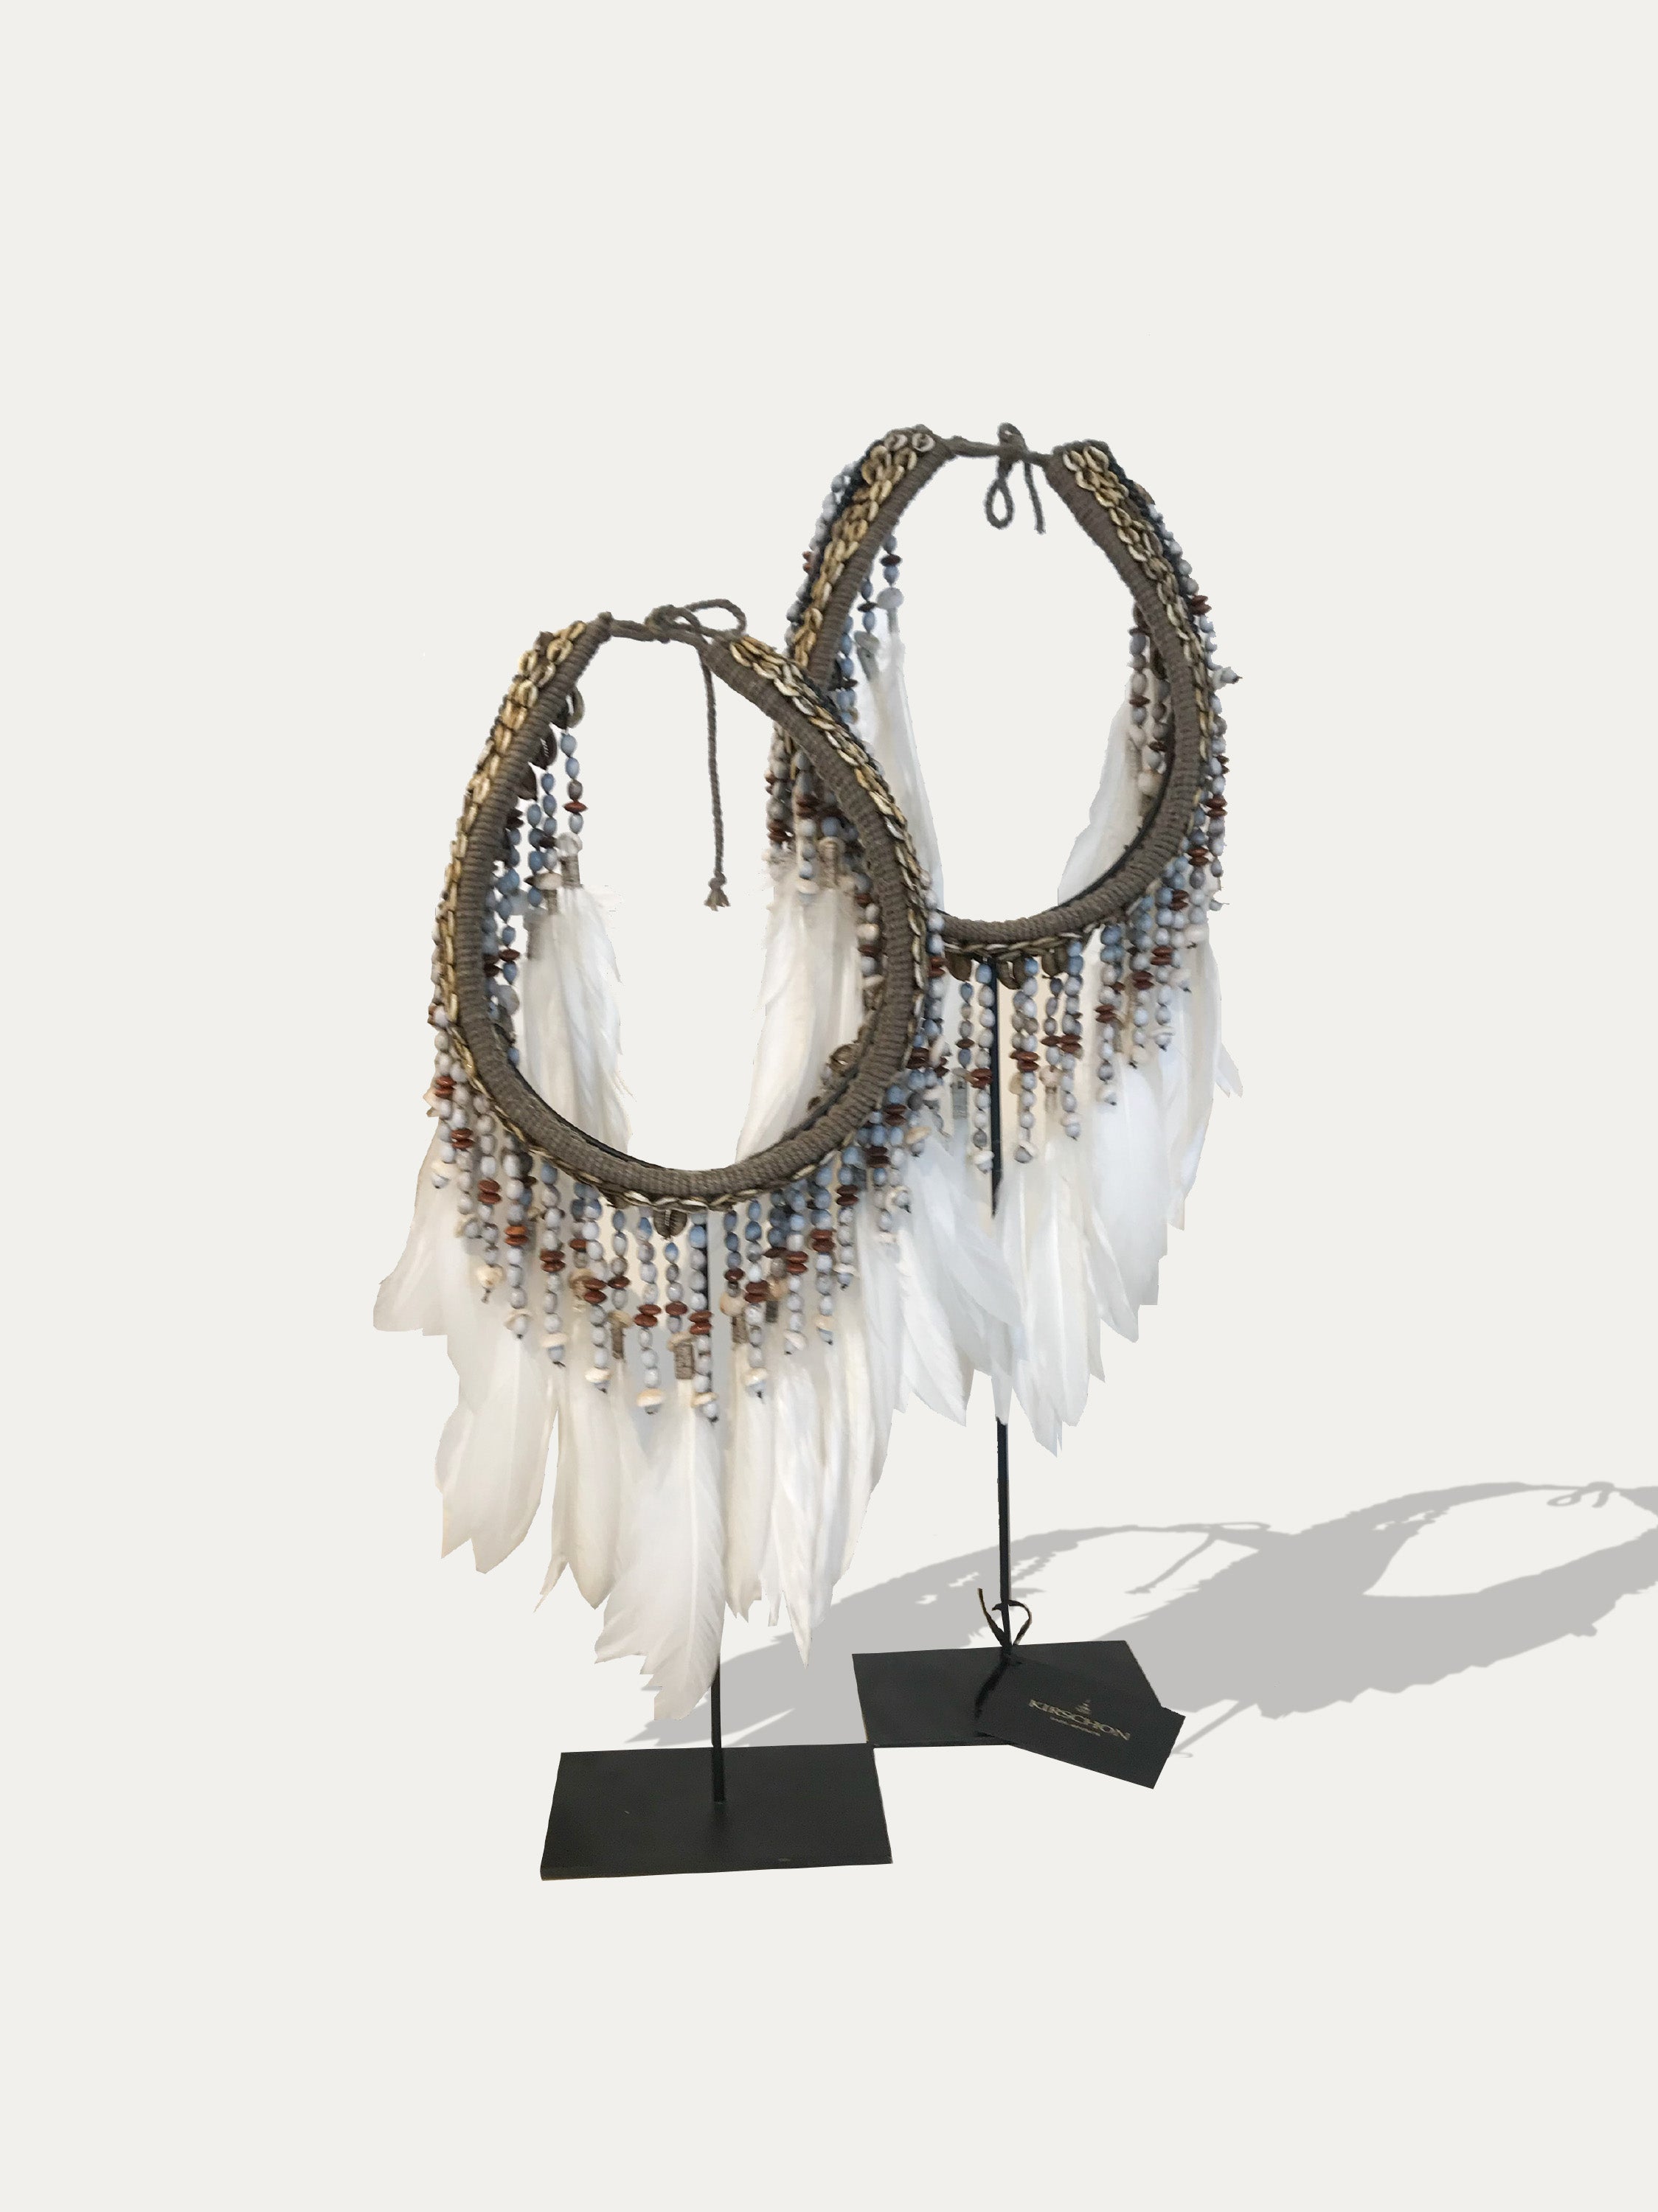 Feather necklaces from Papua - Asian Art from Kirschon